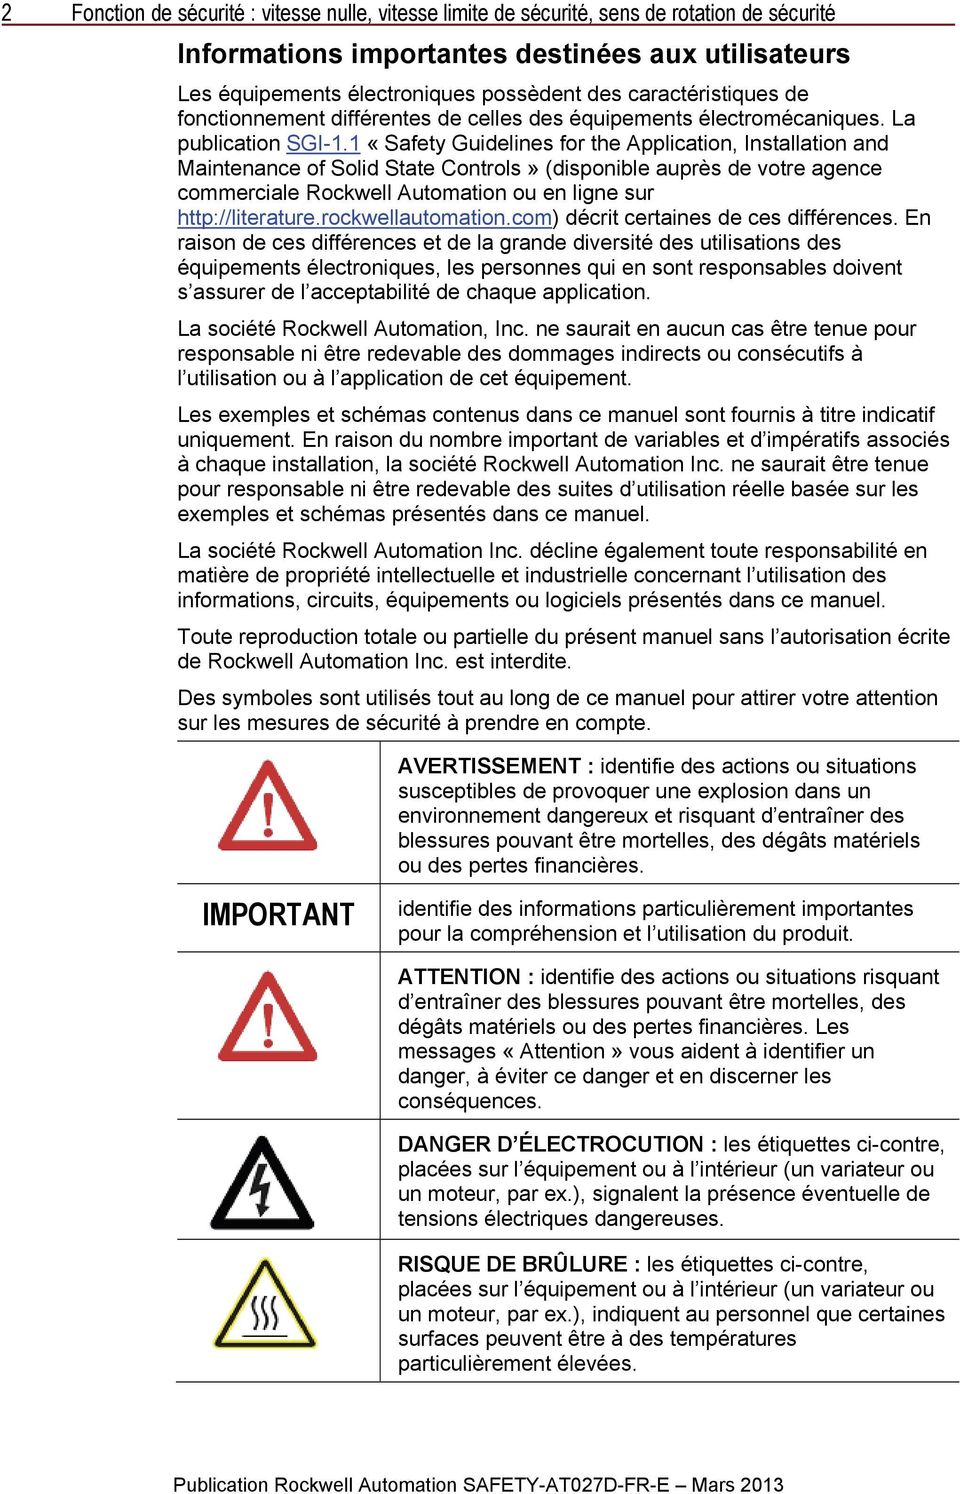 1 «Safety Guidelines for the Application, Installation and Maintenance of Solid State Controls» (disponible auprès de votre agence commerciale Rockwell Automation ou en ligne sur http://literature.